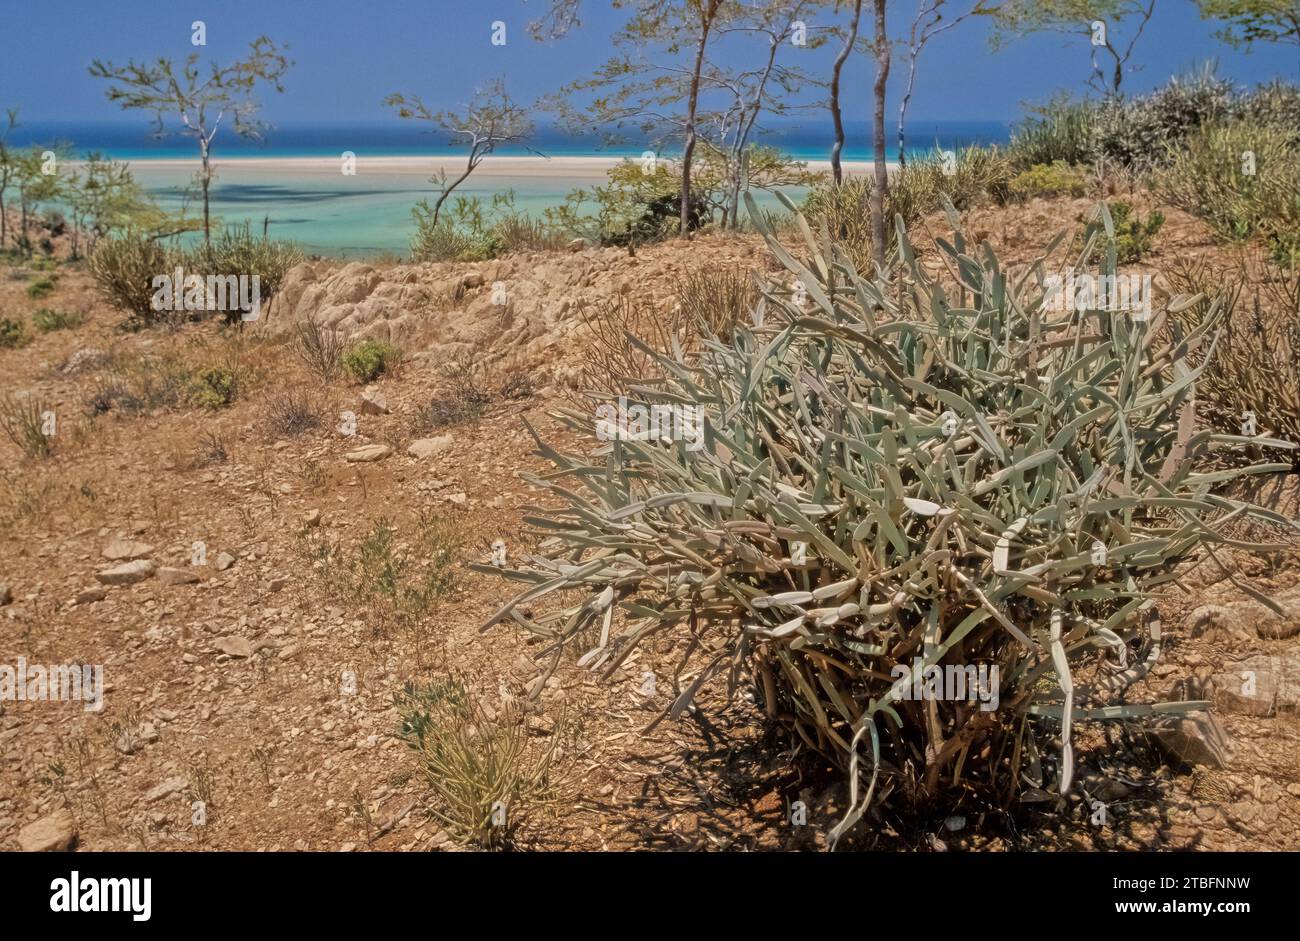 Euphorbia arbuscula is a species of plant in the spurge family (Euphorbiaceae). It is endemic to the archipelago of Socotra in Yemen. Stock Photo